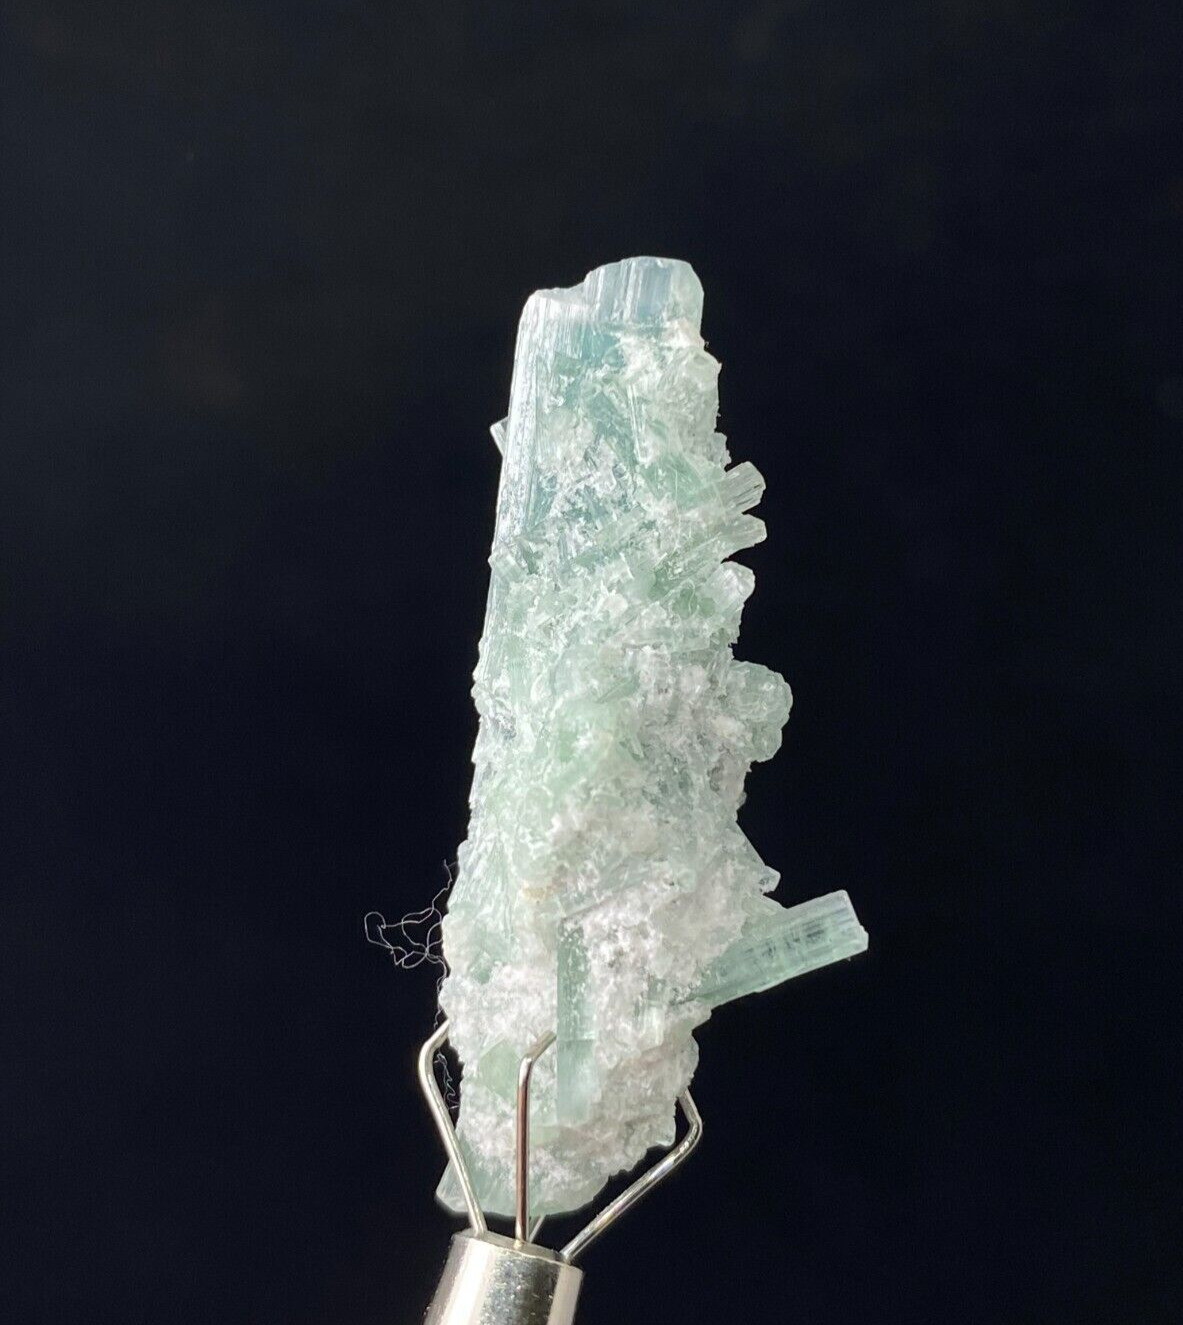 22ct Natural Green Tourmaline Crystal Specimen From Afghanistan